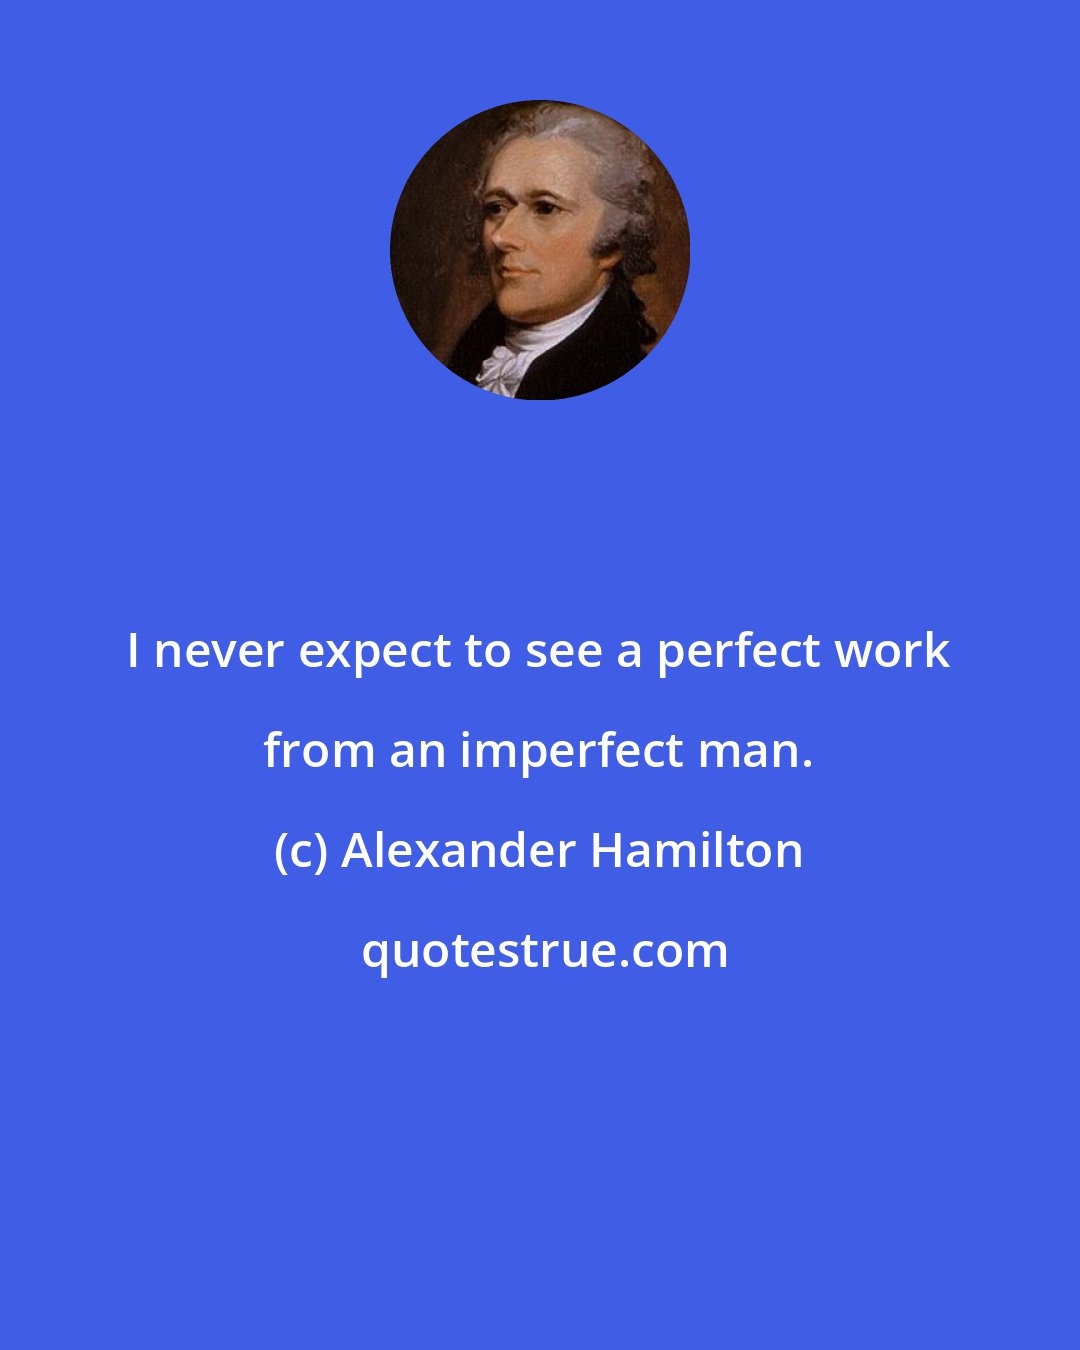 Alexander Hamilton: I never expect to see a perfect work from an imperfect man.